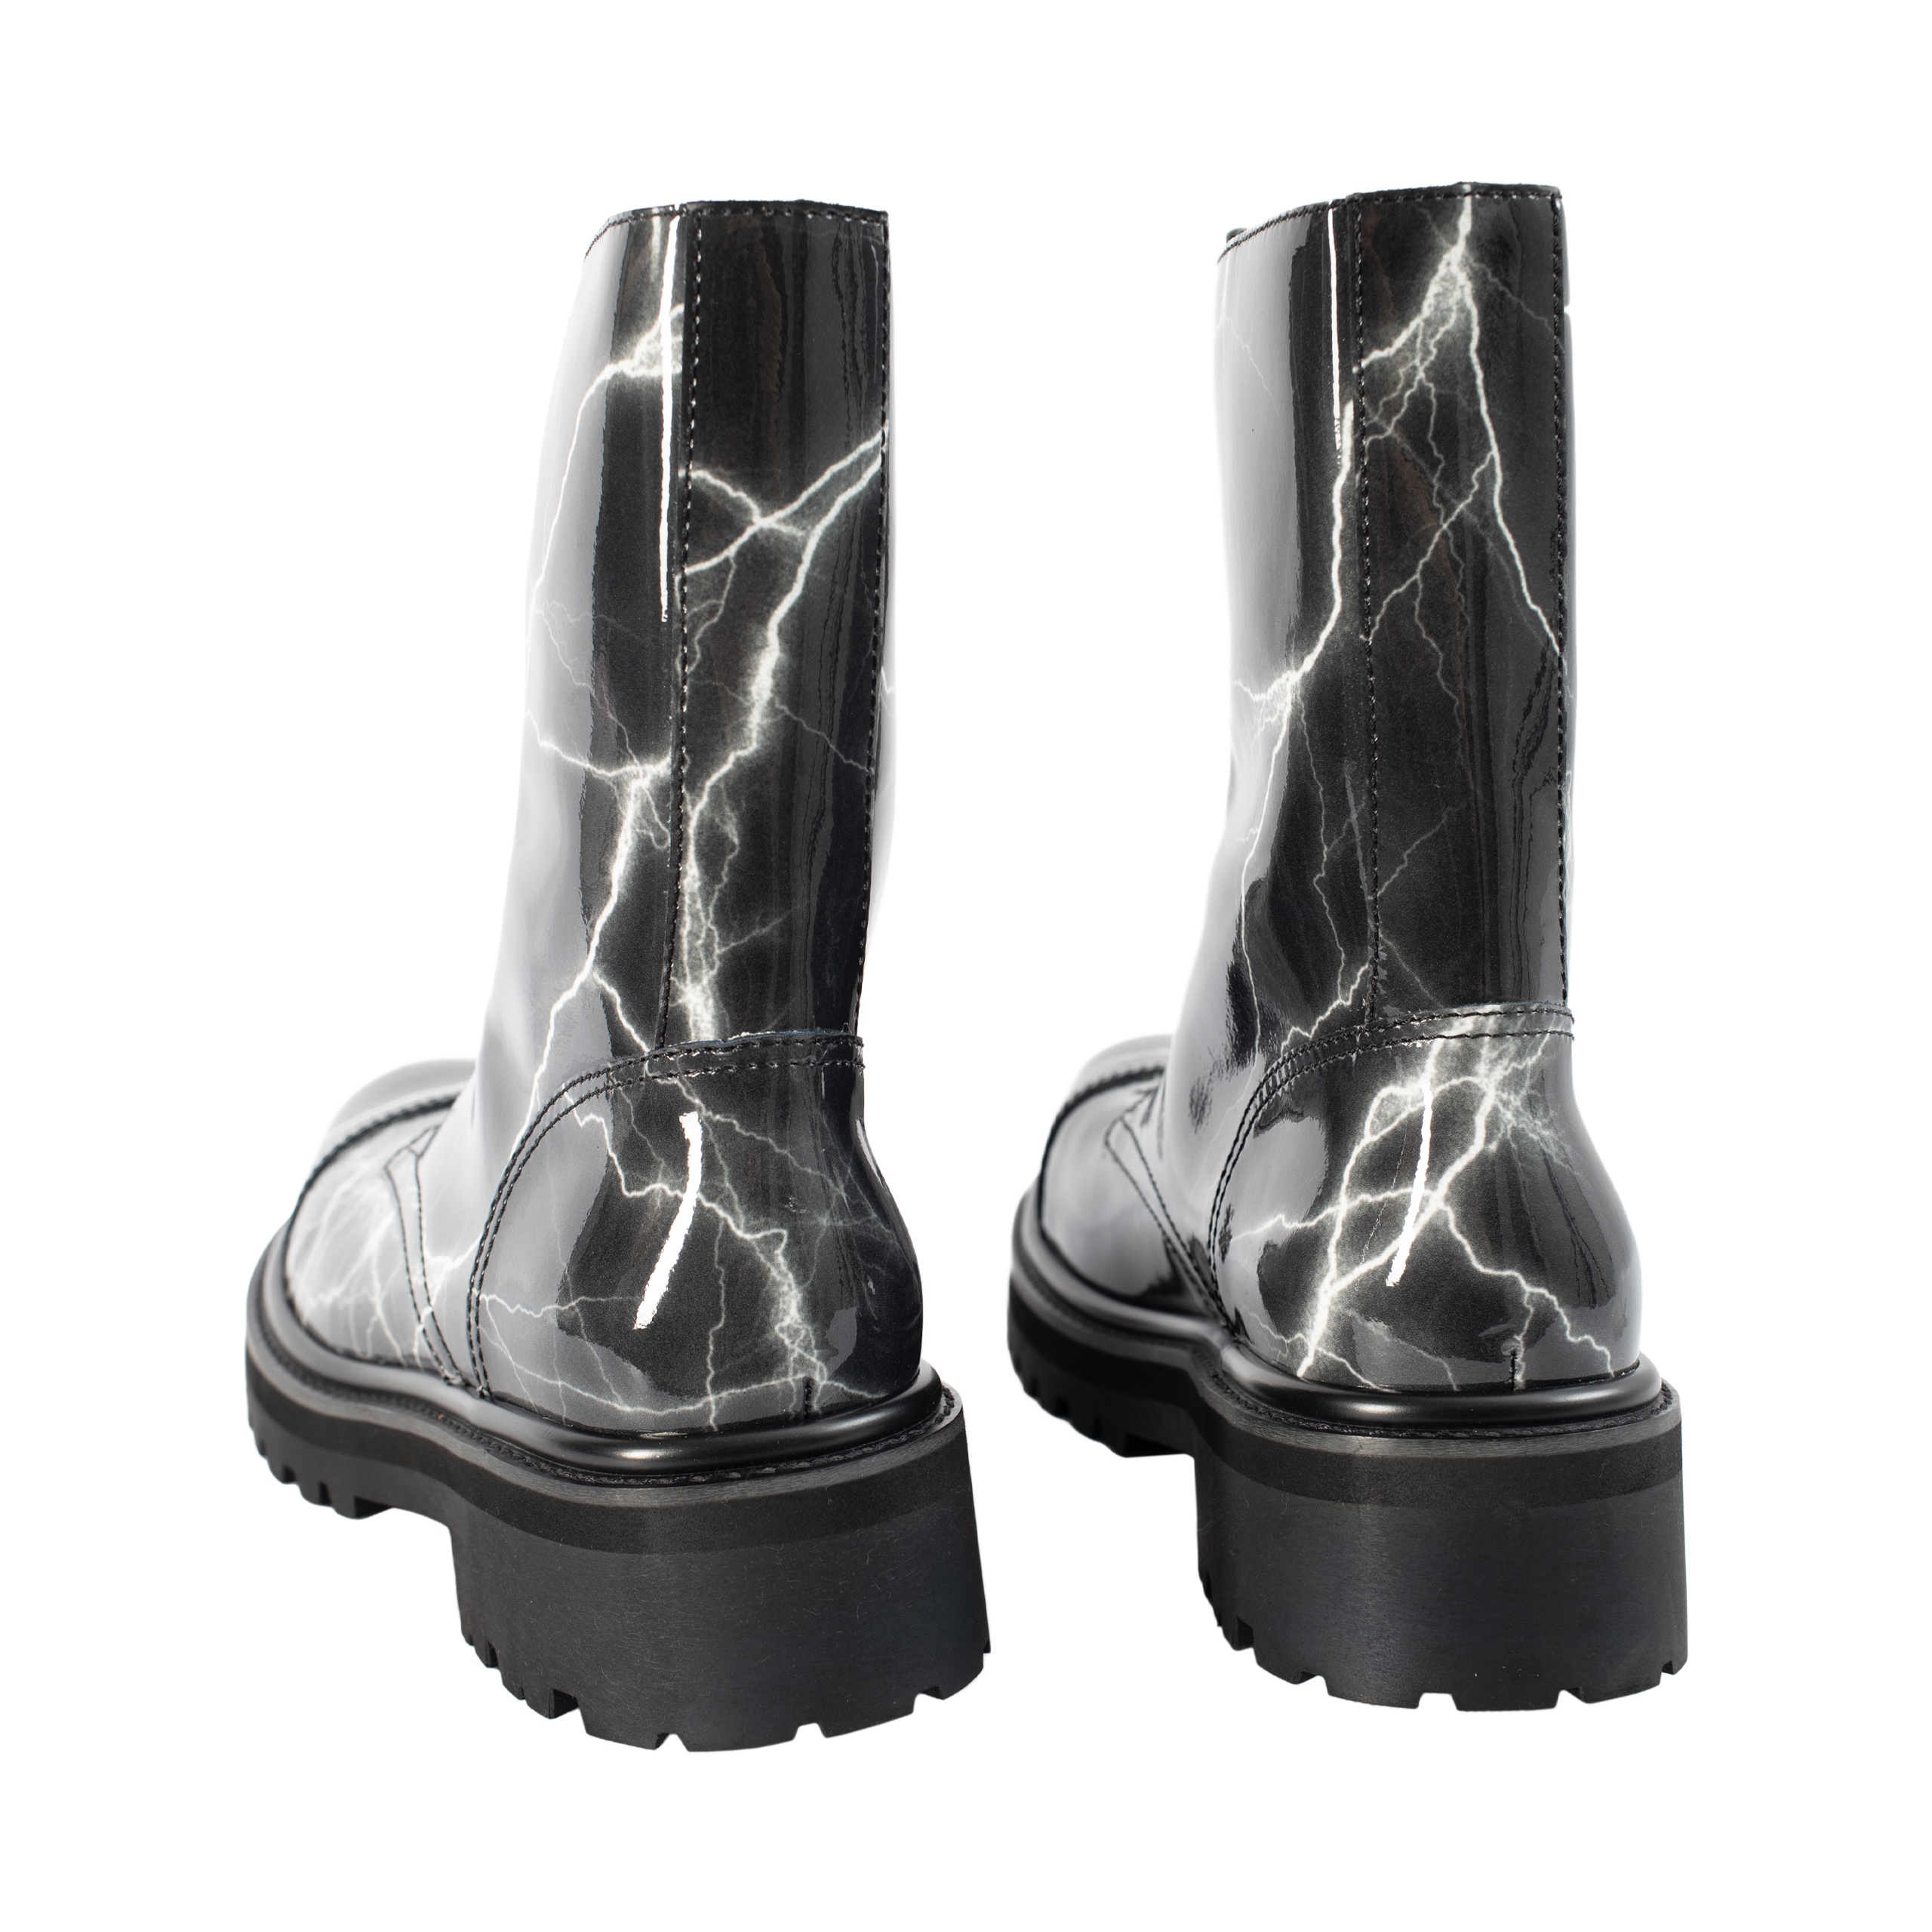 LEATHER BOOTS WITH ZIPPER - 4